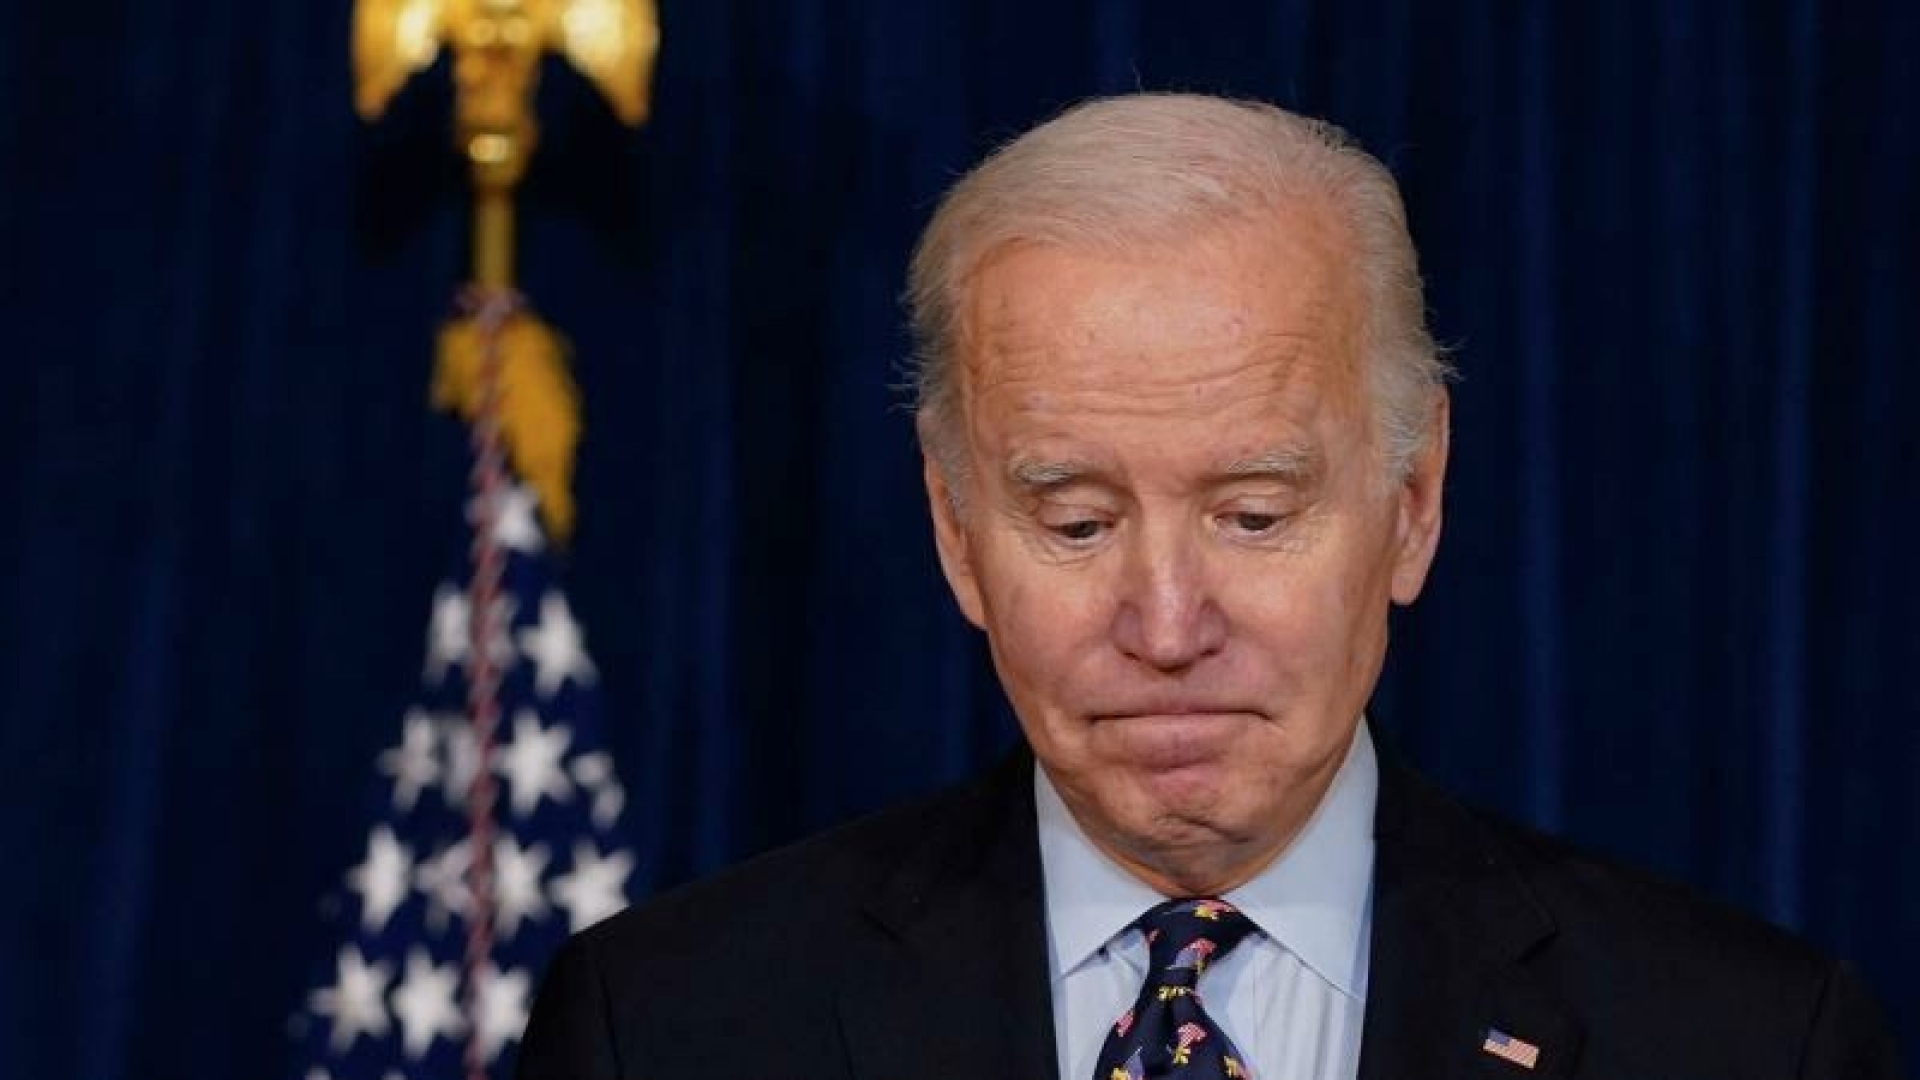 Revenge and annoy: While Zelensky dreams in bipolar attacks, Biden is trying to save face